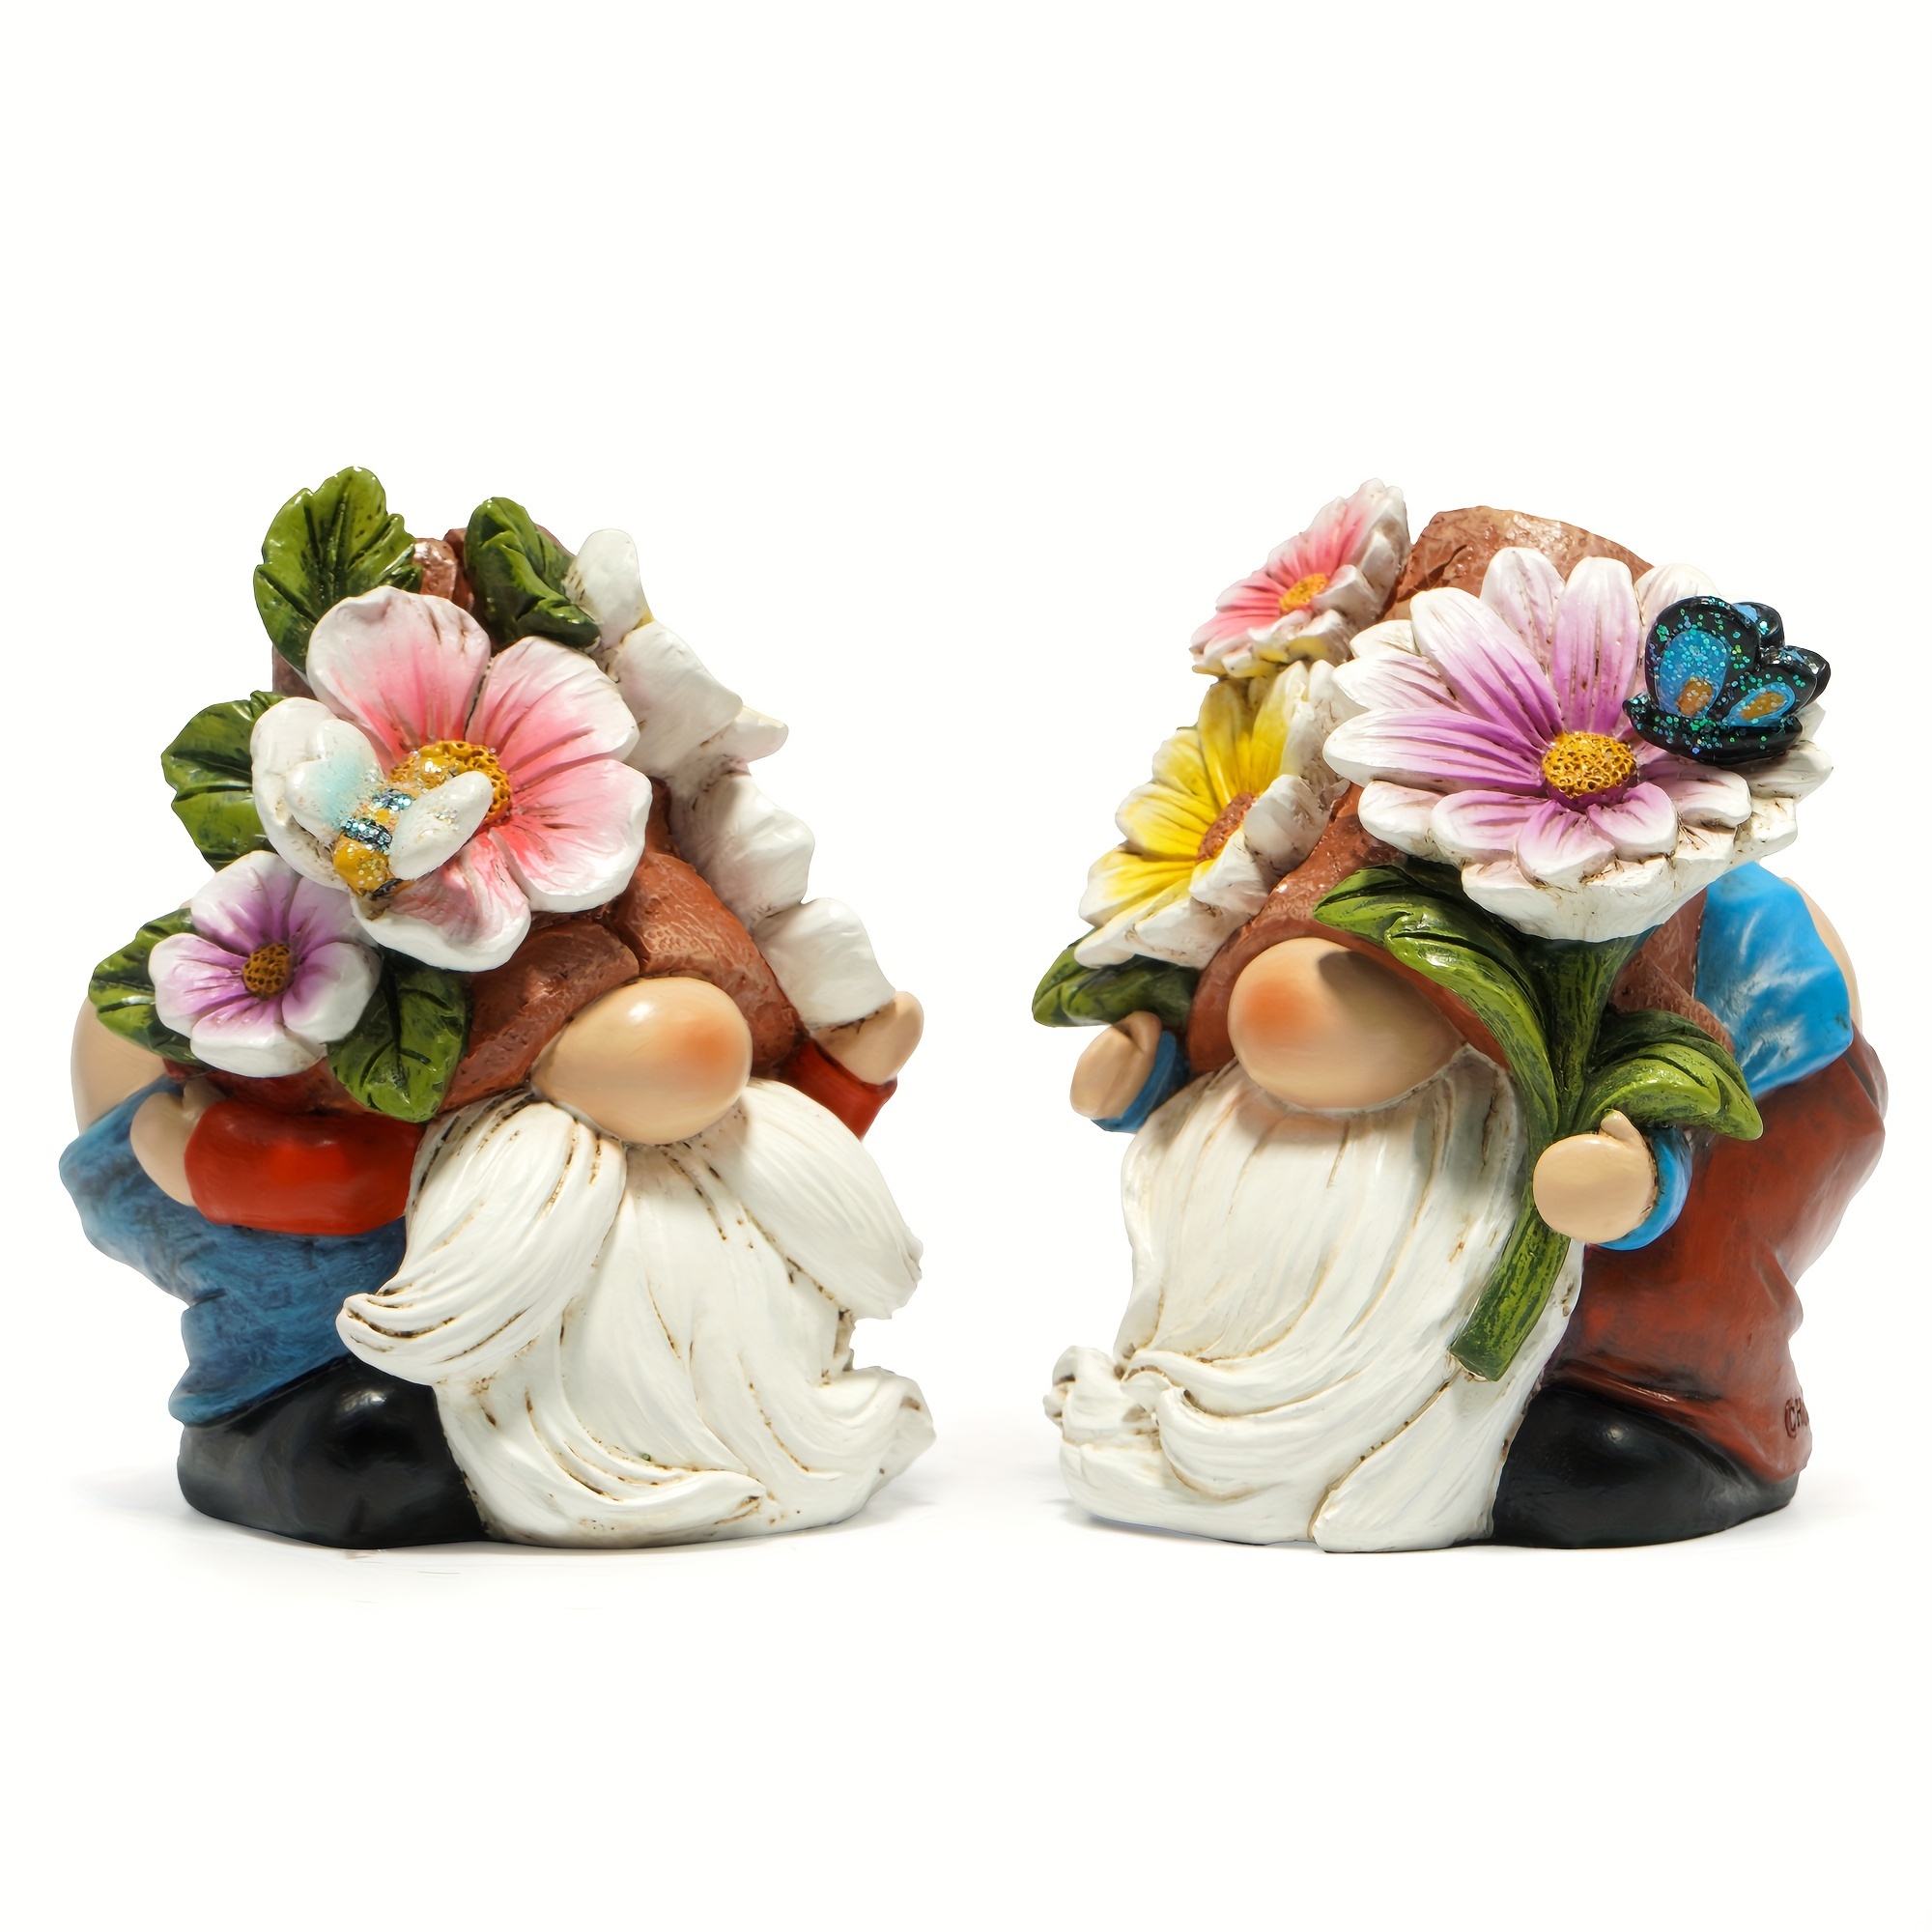 

2 Pcs Spring Garden Gnomes Figurines Decorations Funny Garden Naughty Statue Flowers Gnomes Spring Outdoor Decor Flowers Language Conveys Feelings And Tells A Unique